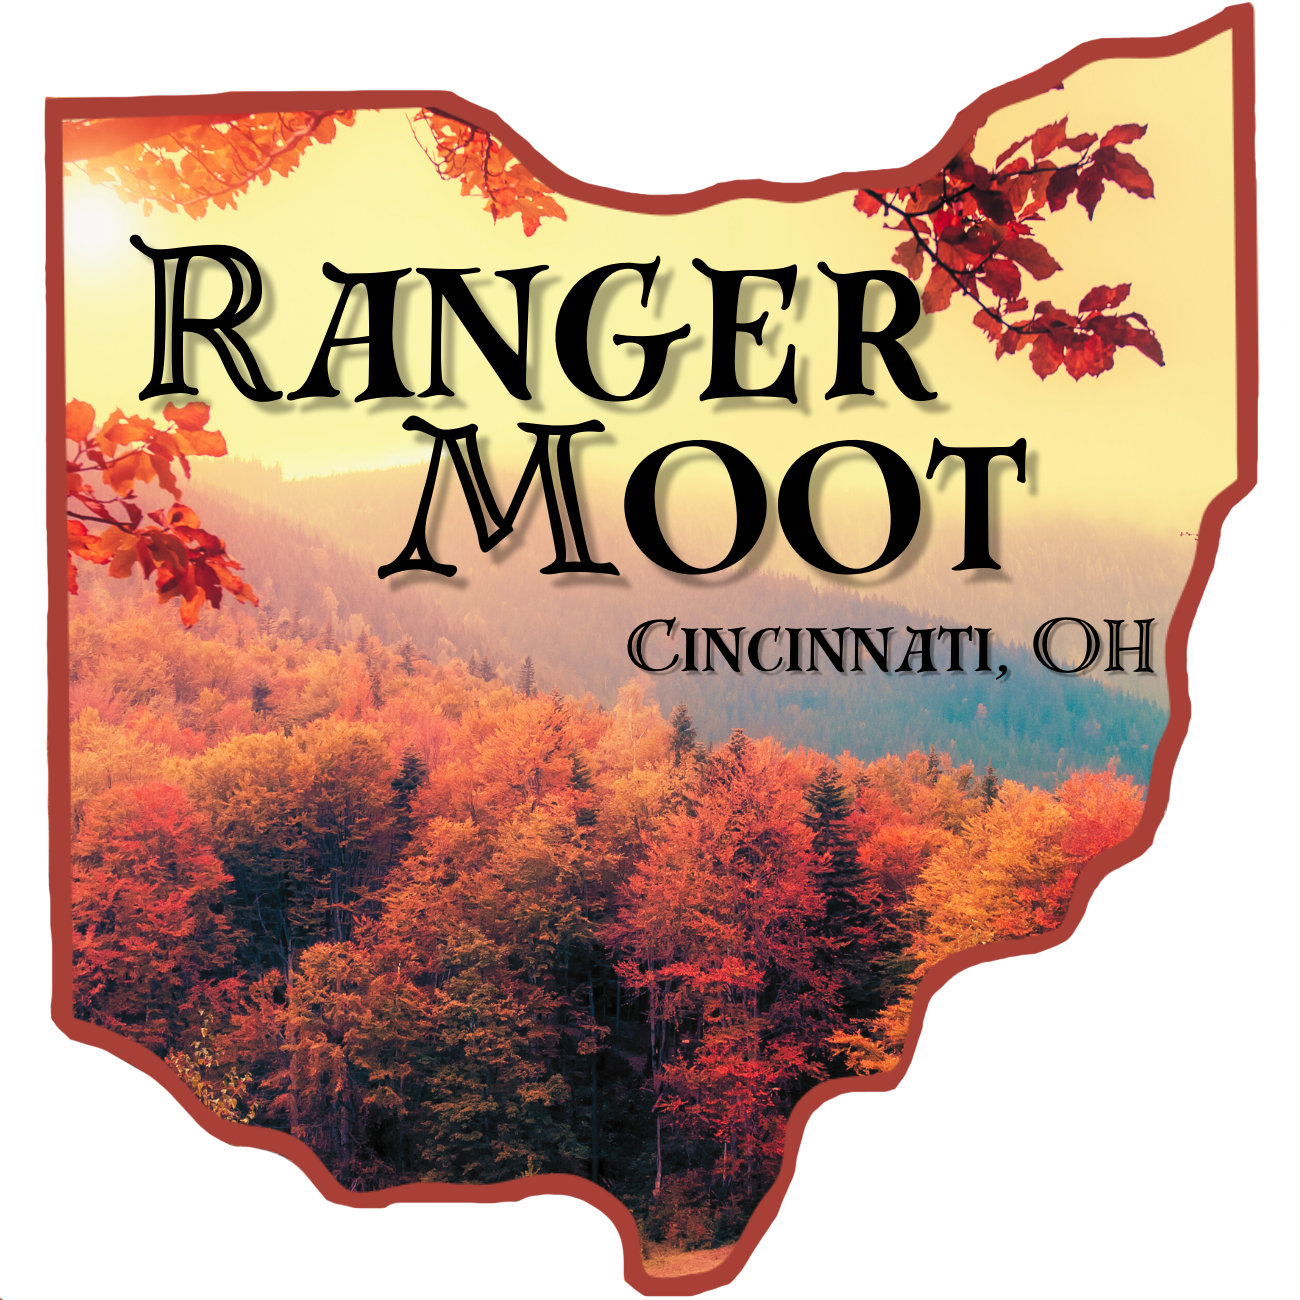 An icon in the shape of the state of Ohio with "Ranger Moot - Cincinnati, OH" written inside it. The fall foliage of a forest shows hues of red, brown, and yellow.